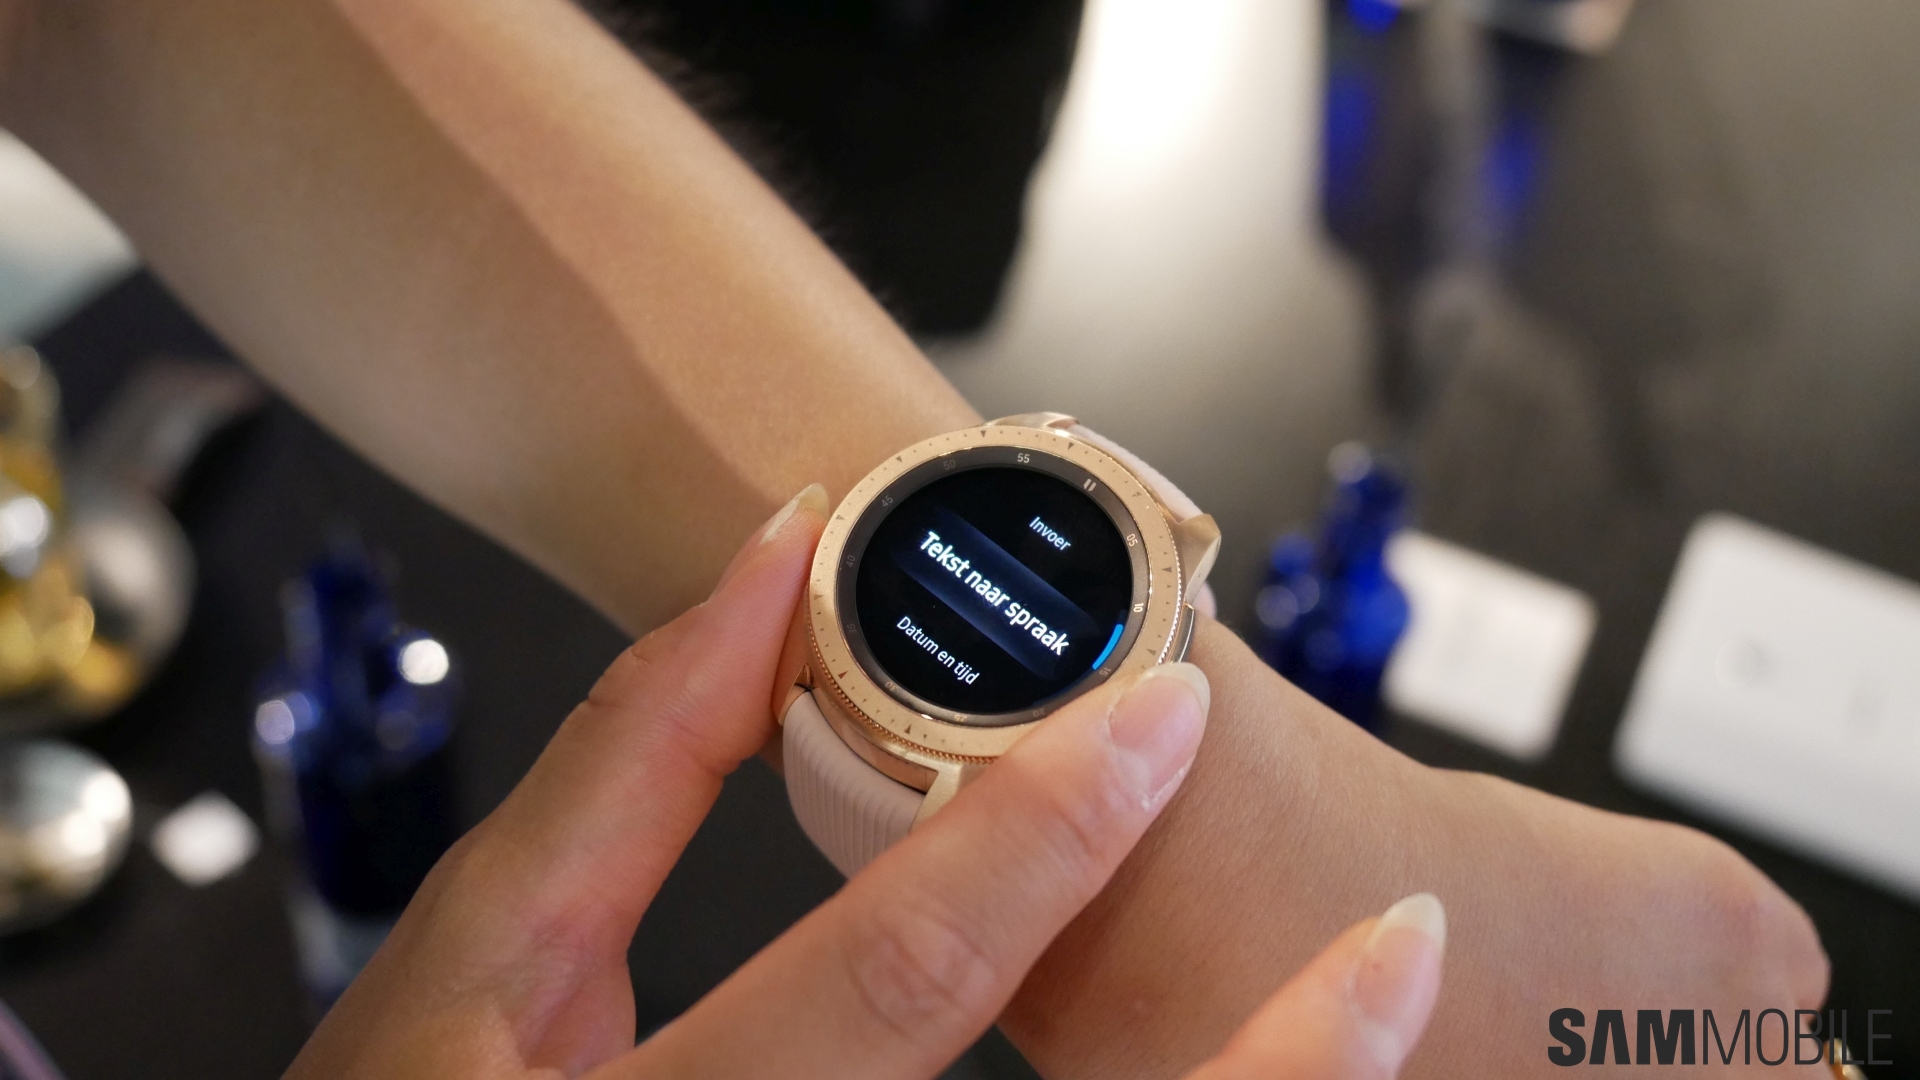 Samsung Galaxy Watch specs, new features and release date - SamMobile